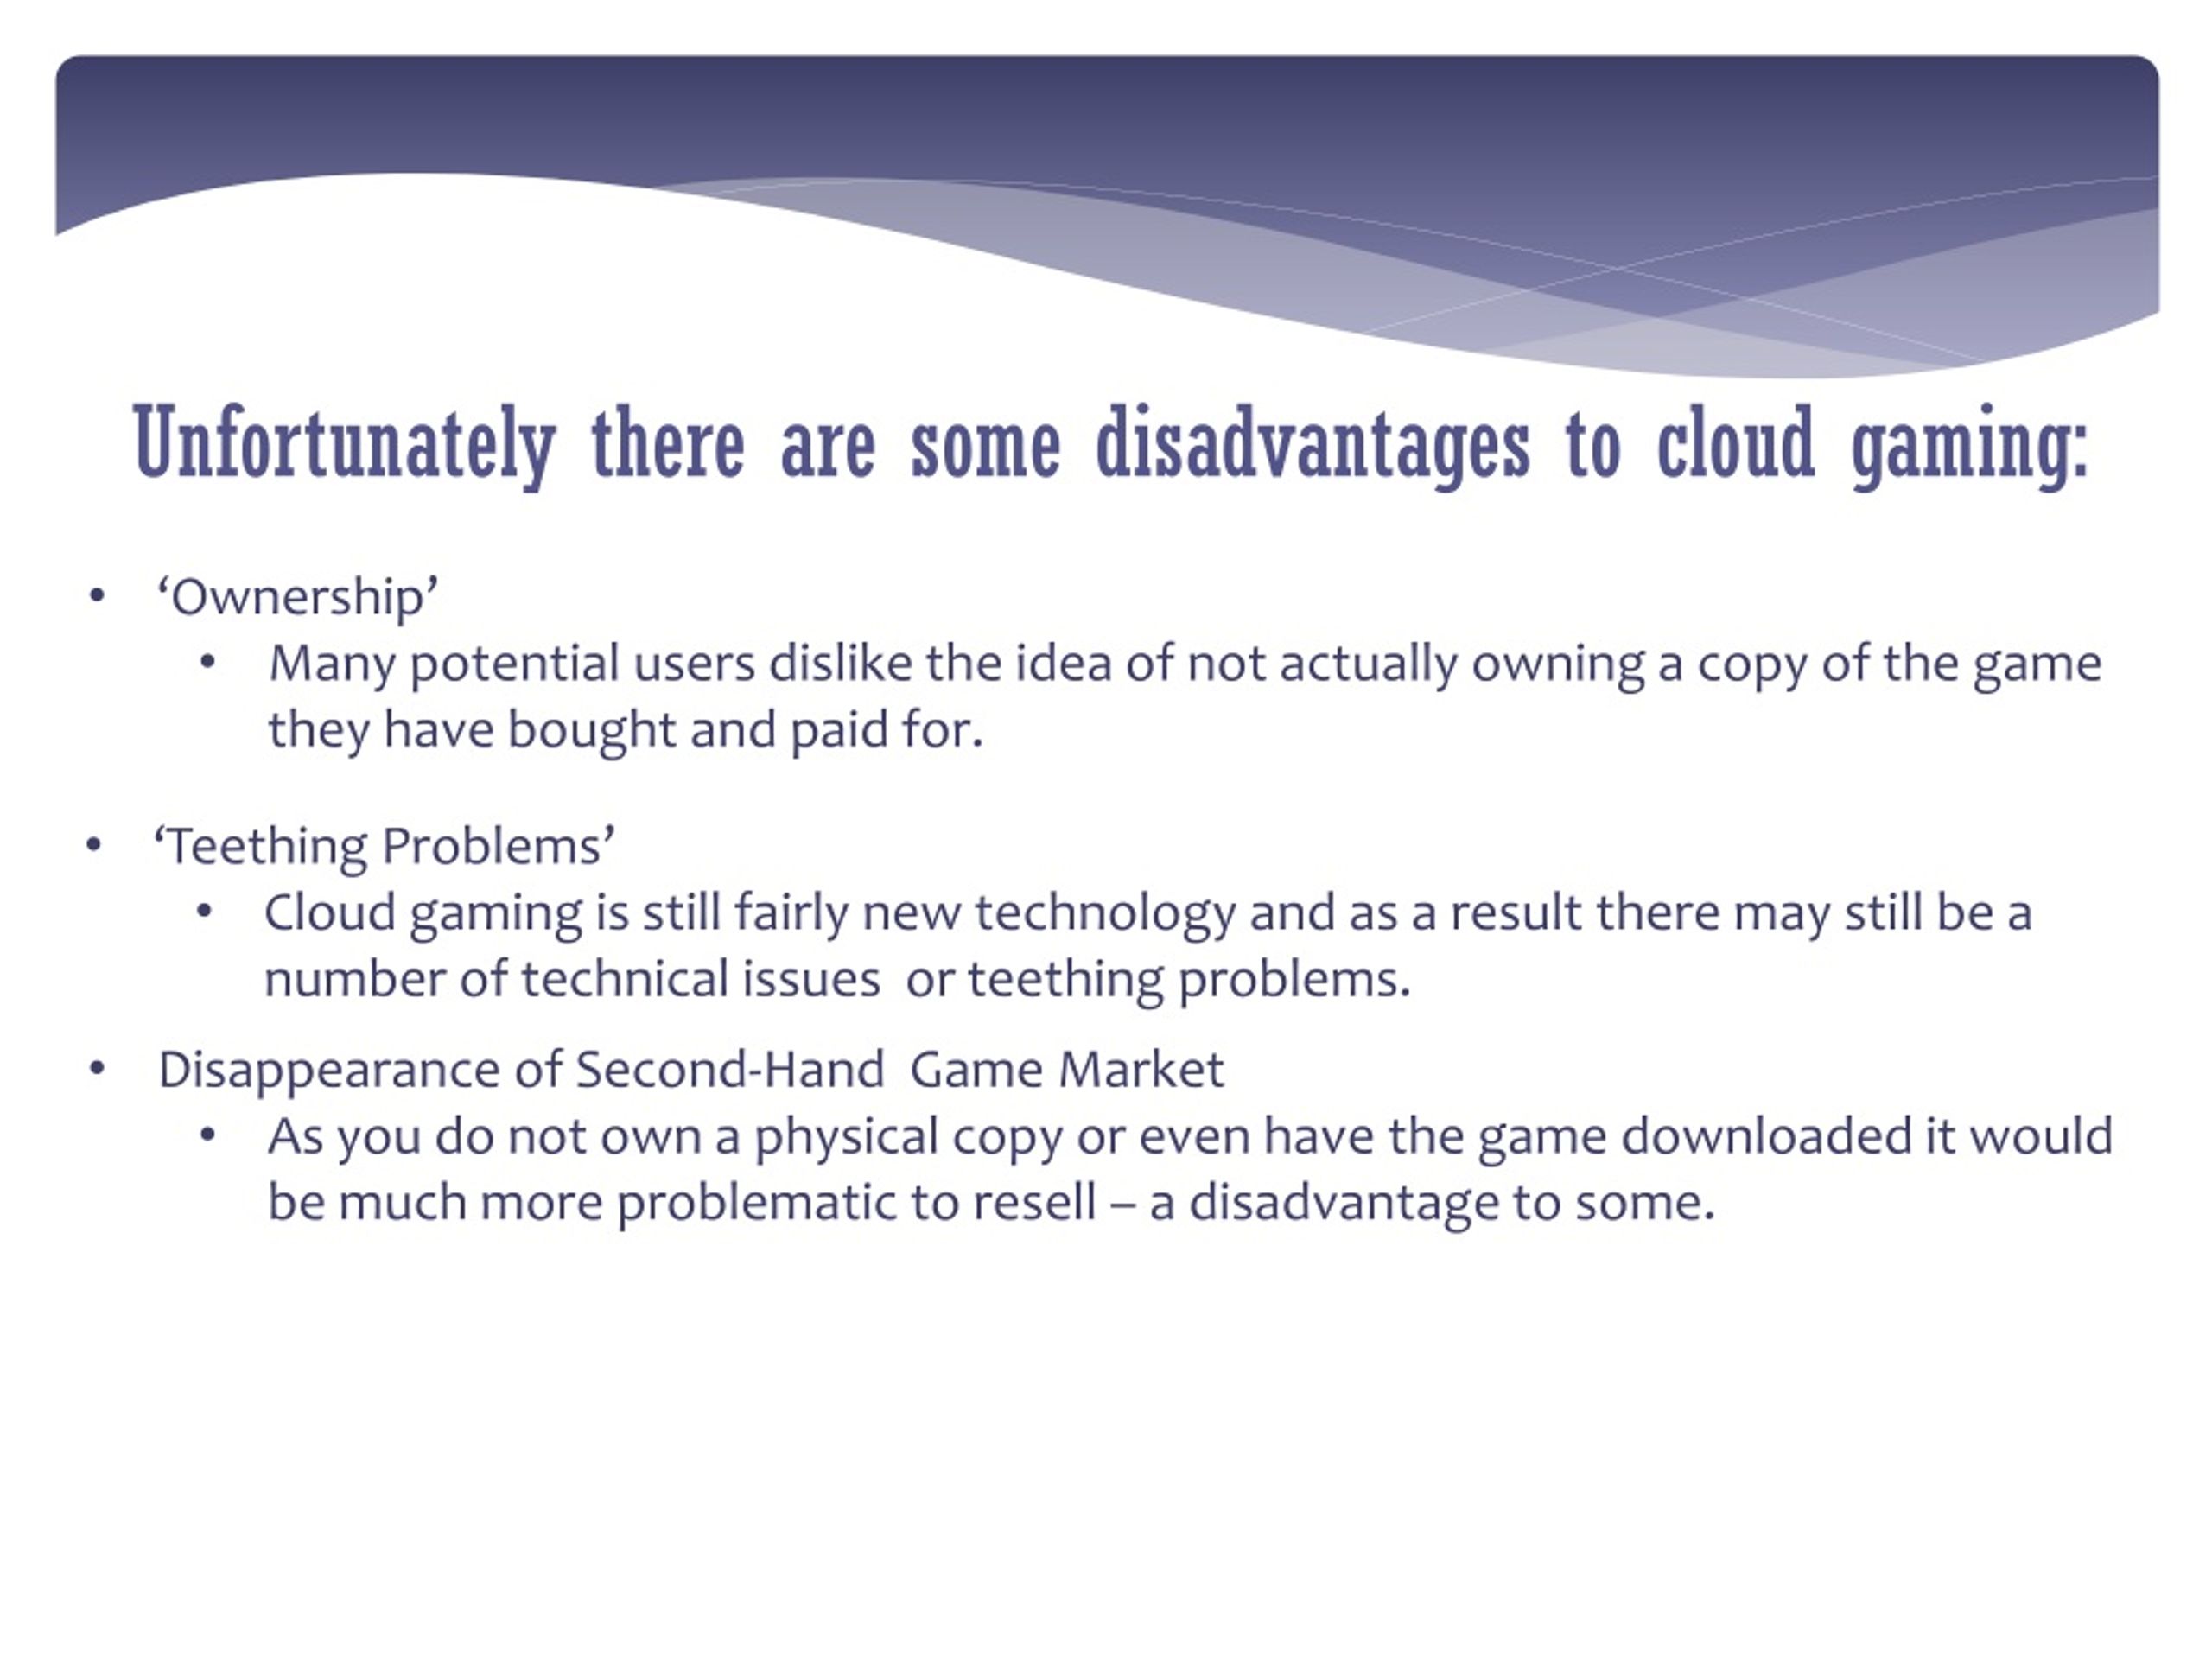 What are the advantages and disadvantages of Cloud gaming